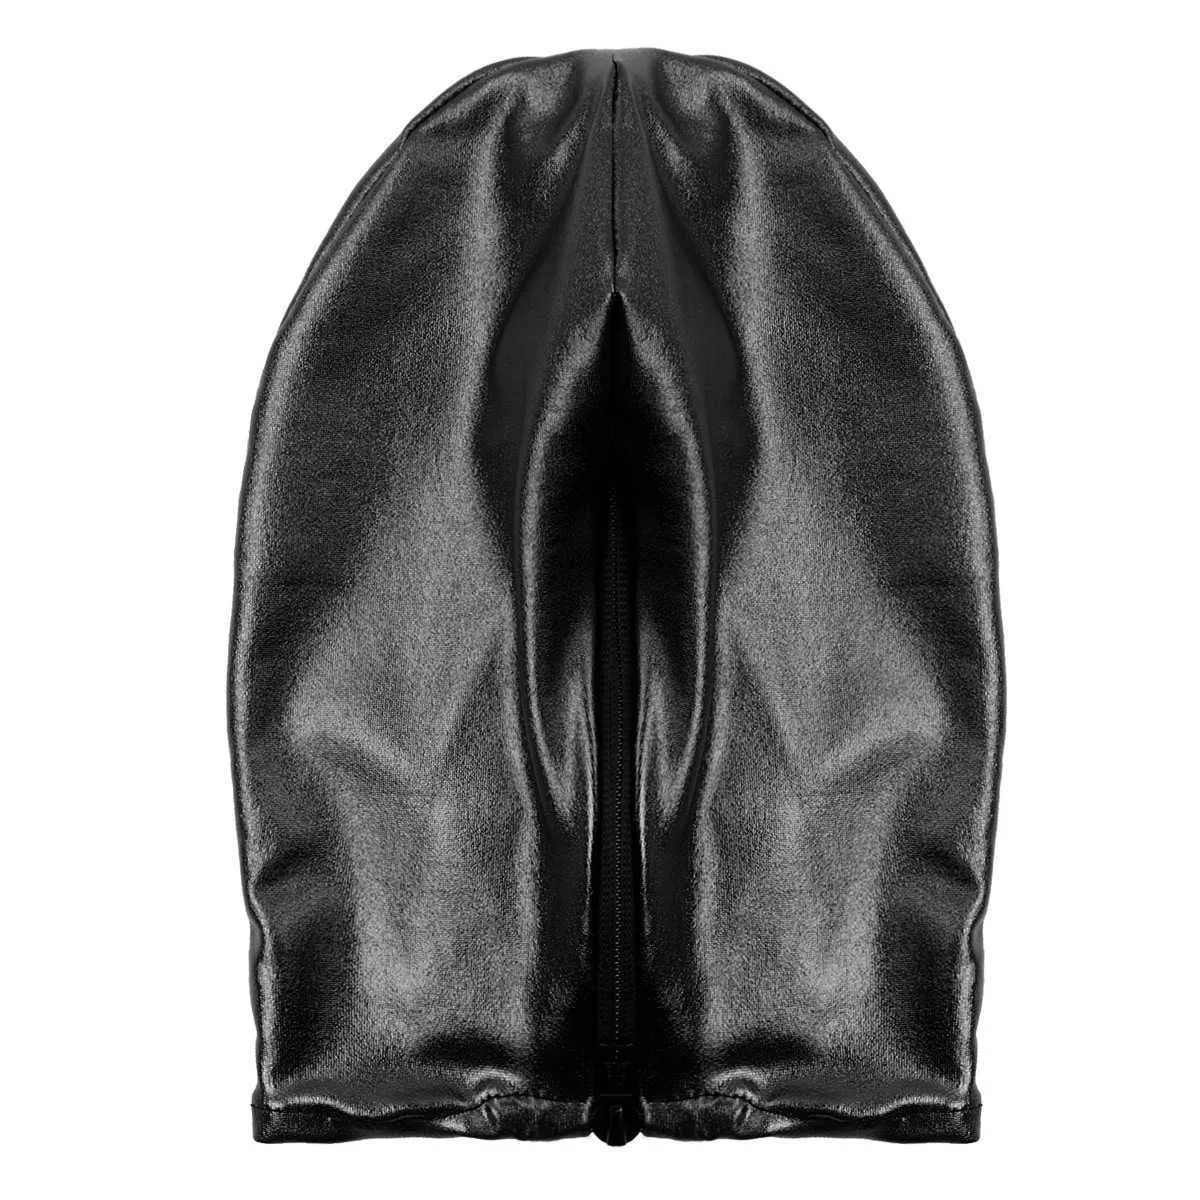 Sexy Unisexe Men Femmes Cosplay Face Mask Hood For Role Play Costume Latex Shiny Metallic Open Mouth Hole Headgear Full Face Mask Q04456928